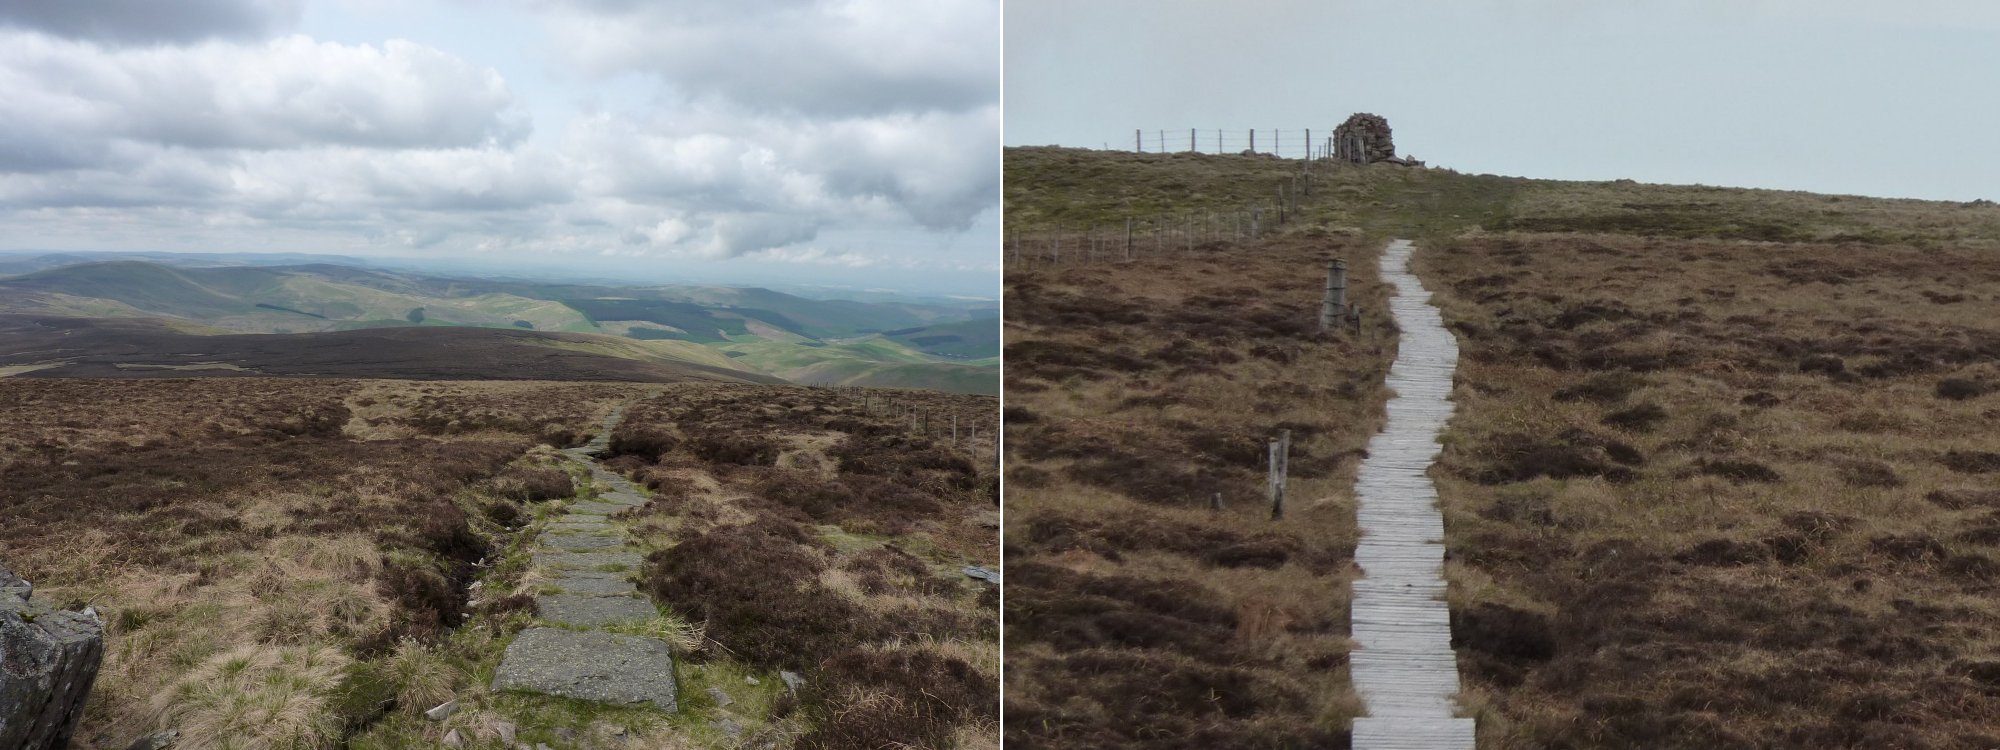 Left to Right: Looking back along the path from the turn to The Cheviot,     Duckboards over the peat